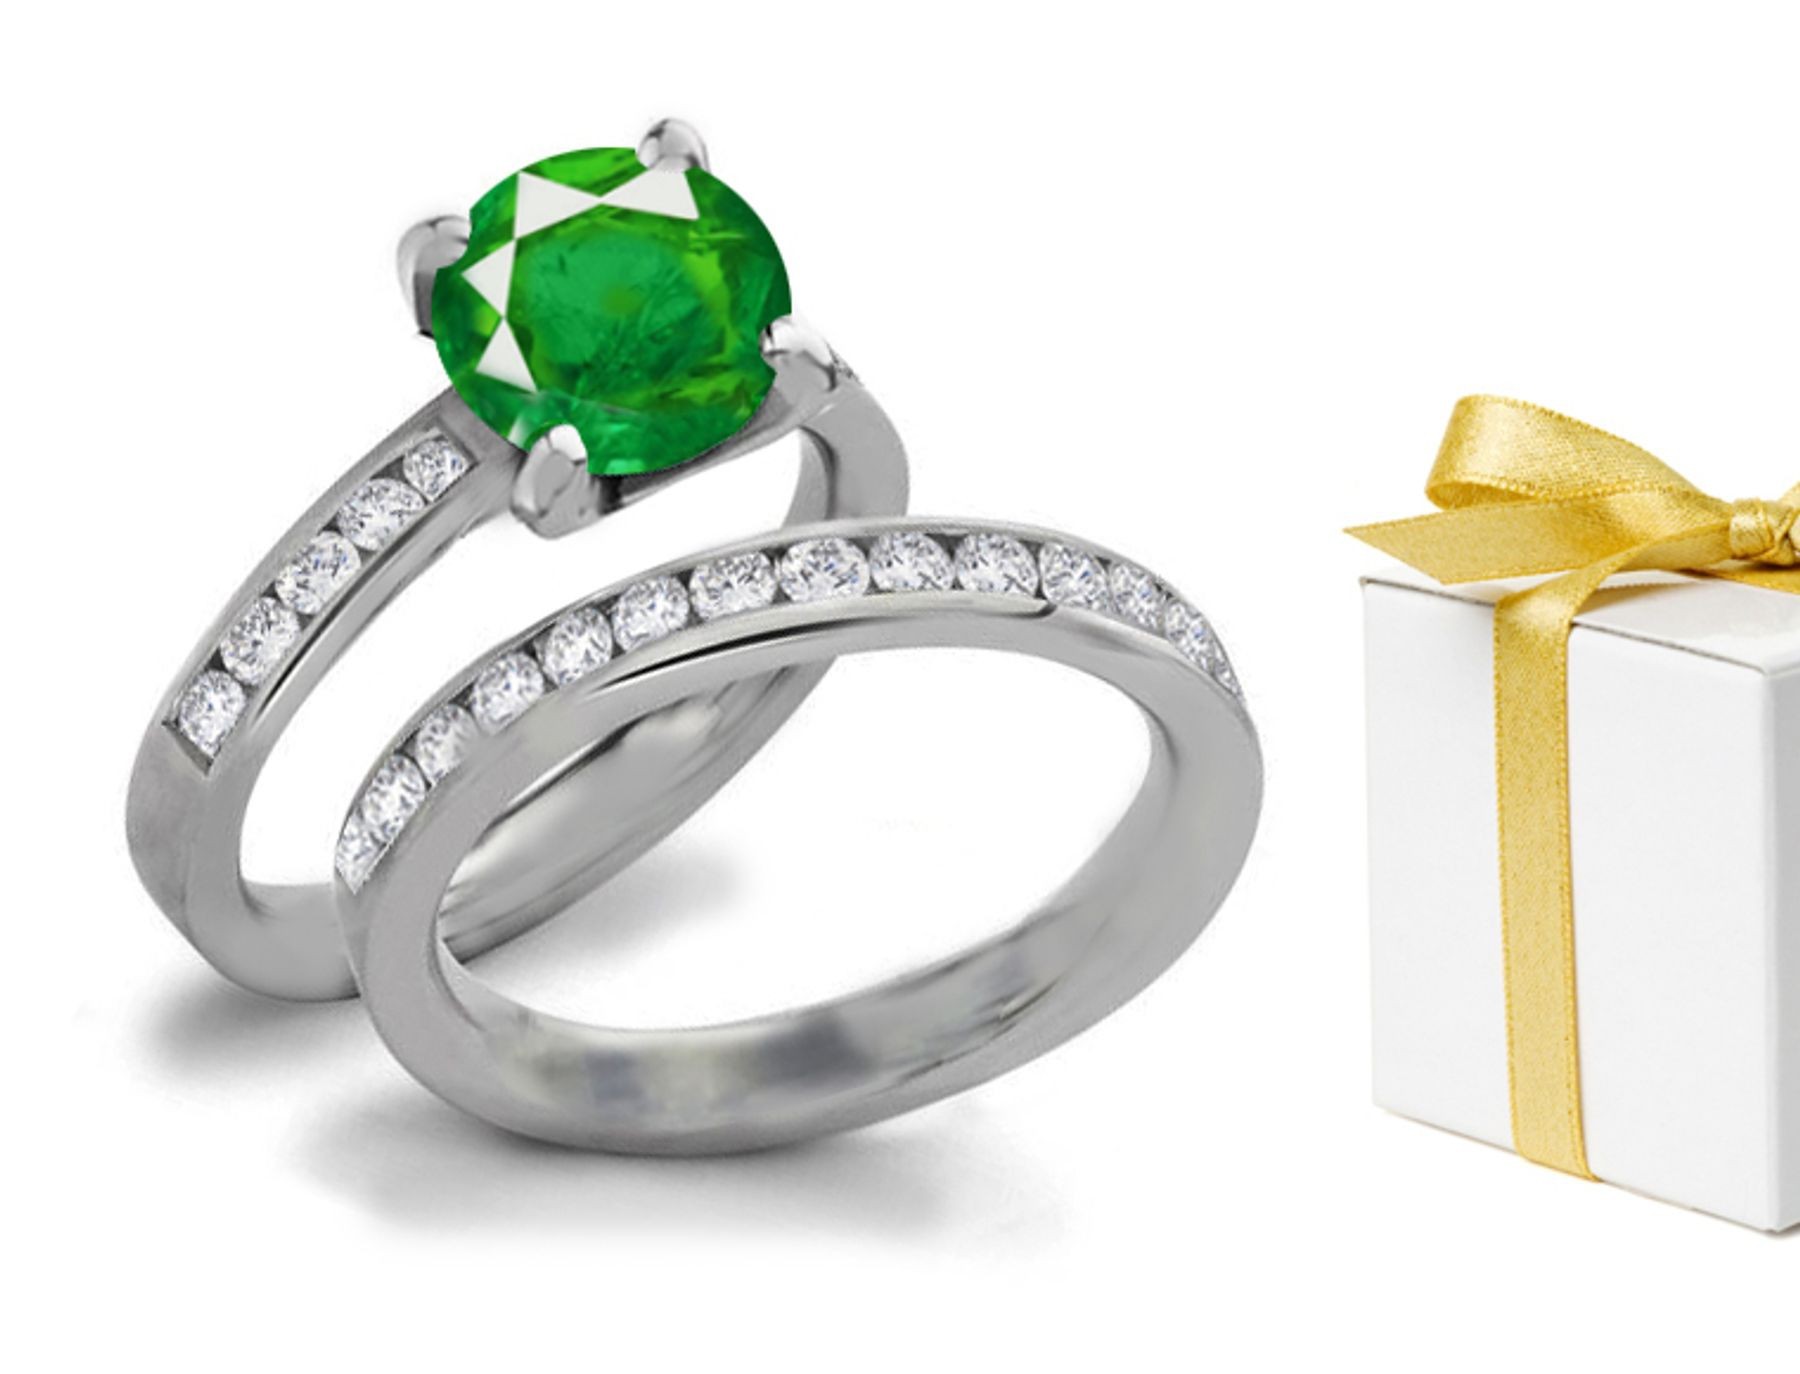 Prices Depending Upon Size:Extraordinary Channel Set Emerald Ring With Diamonds in 14k White Gold 